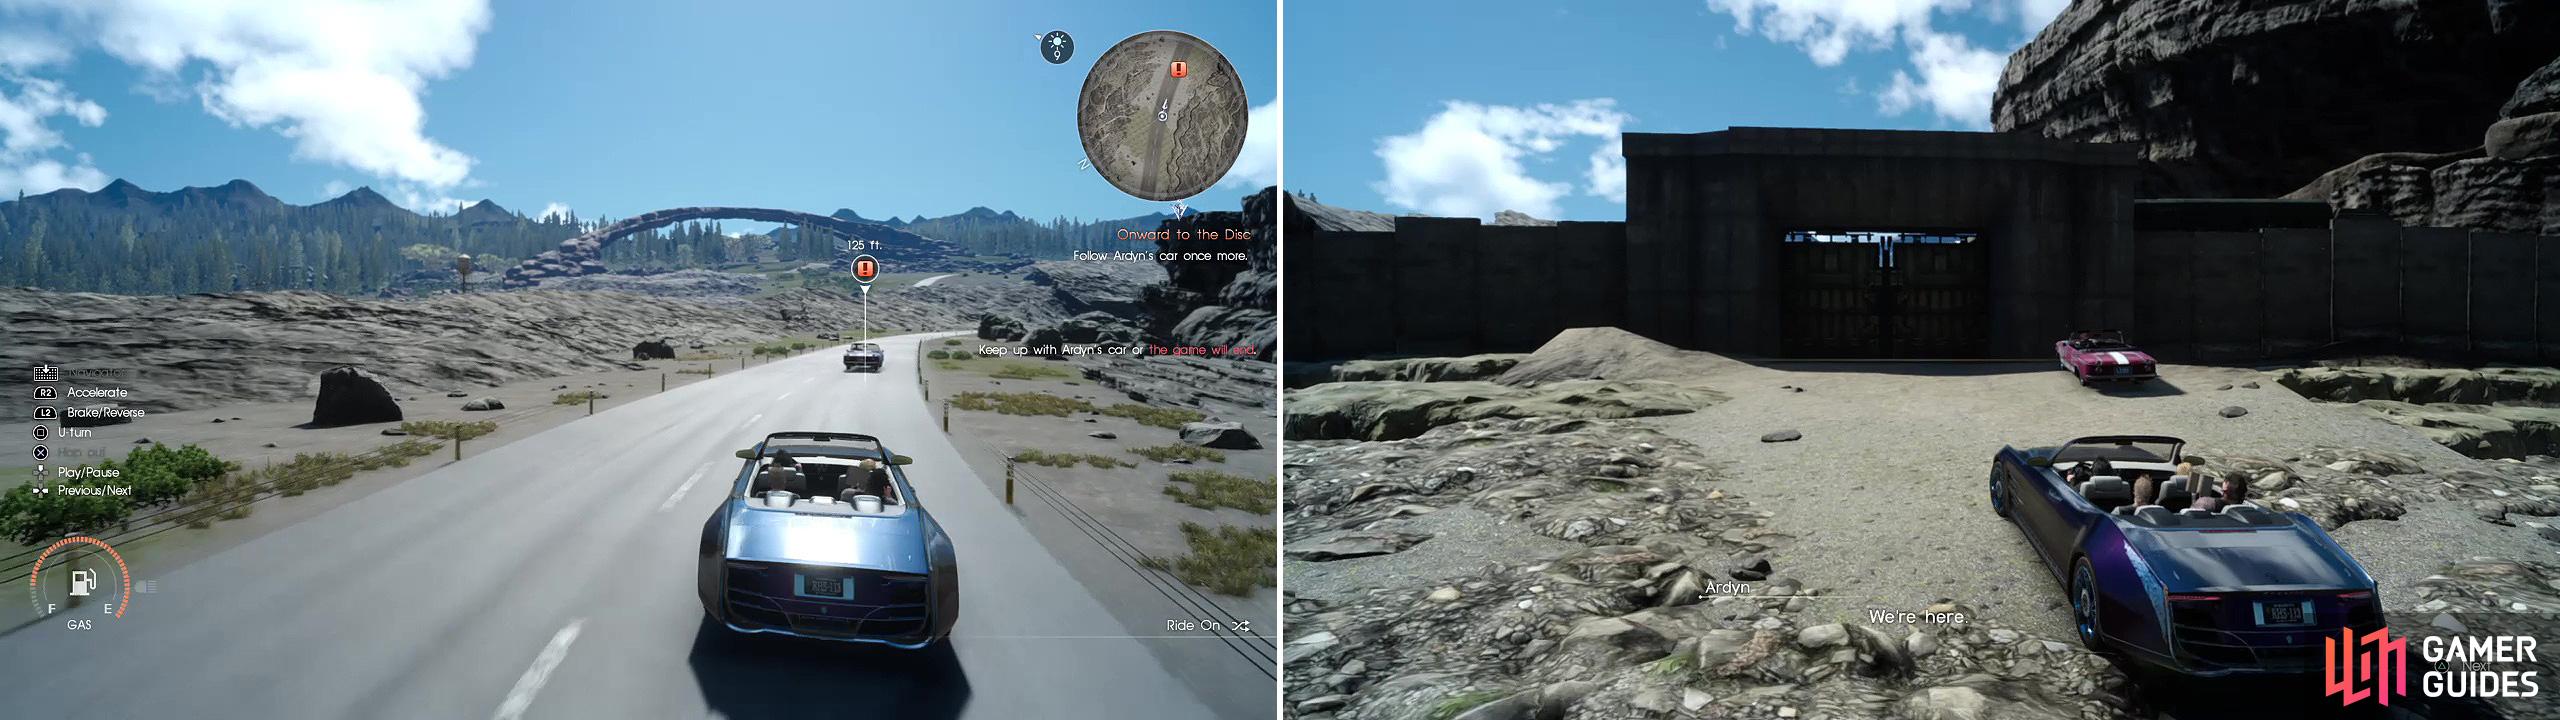 Make sure to keep up with Ardyn’s car (left) or you’ll fail the mission. Eventually you’ll pull up to the gates of the Disc (right) where Ardyn will leave you.